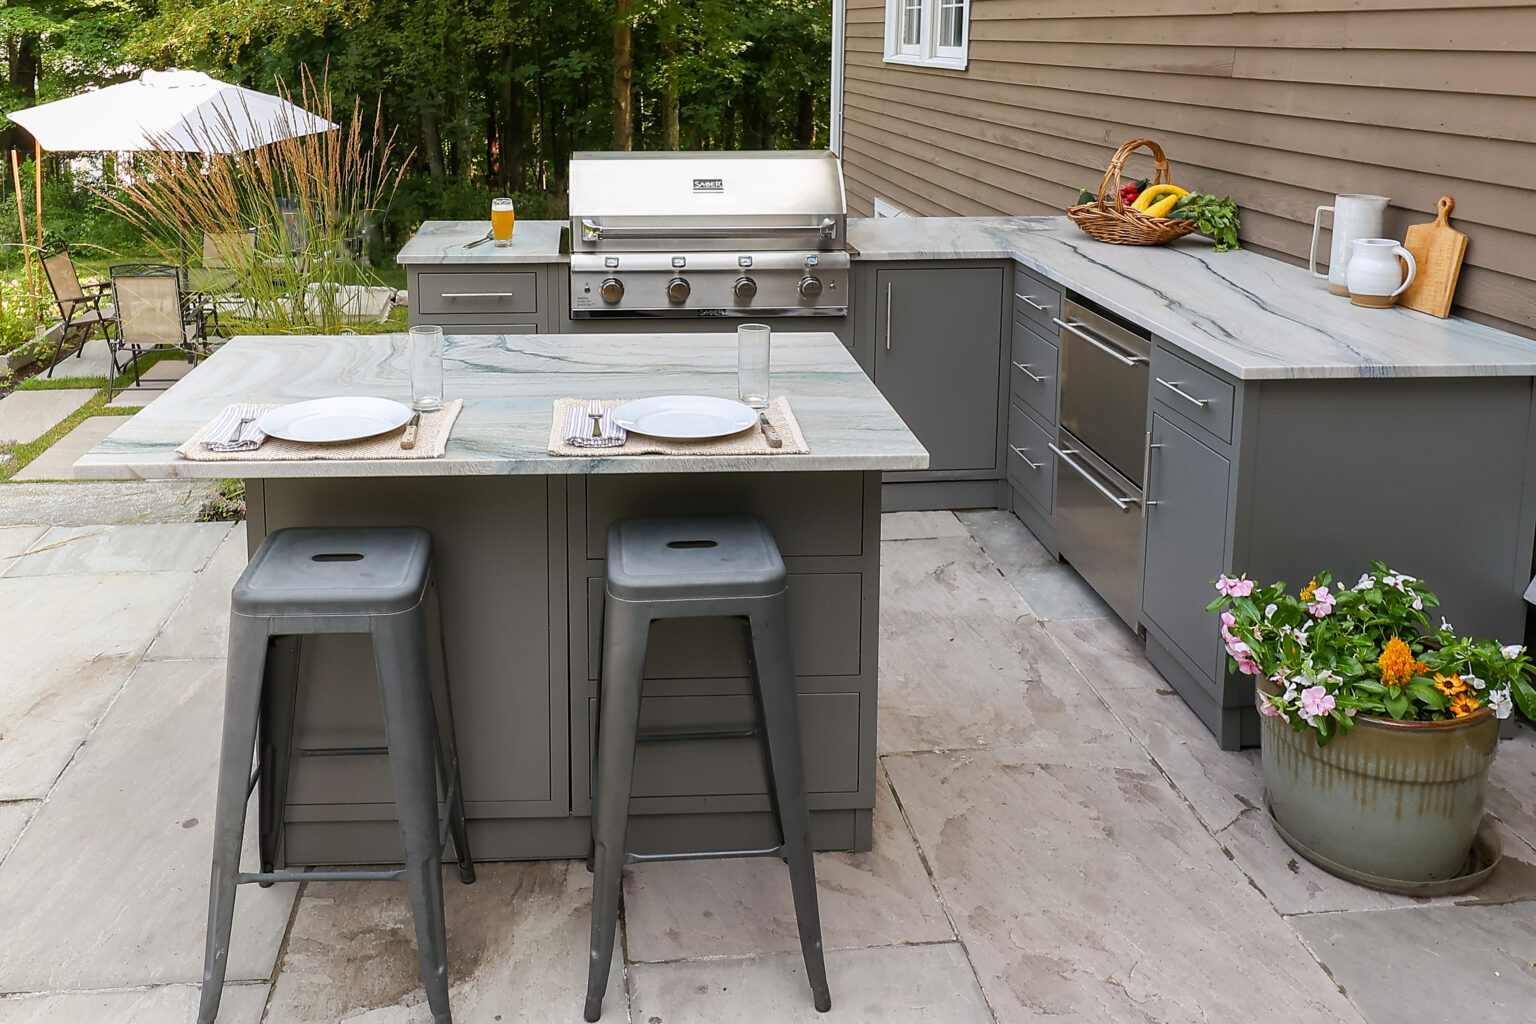 Questions to ask when planning an outdoor kitchen - example kitchen